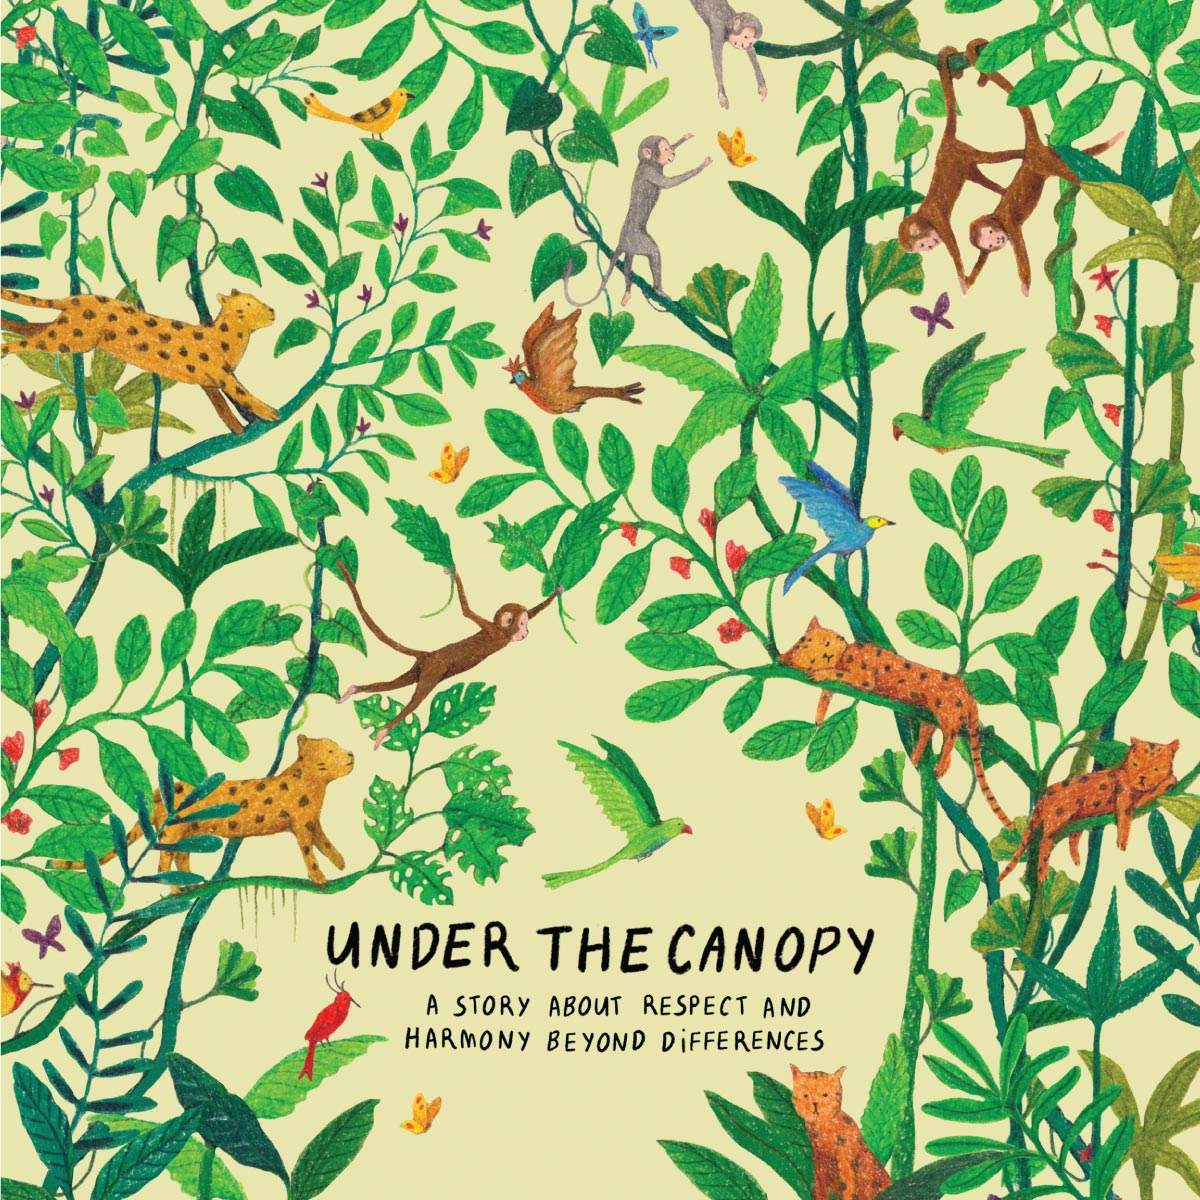 UNDER THE CANOPY